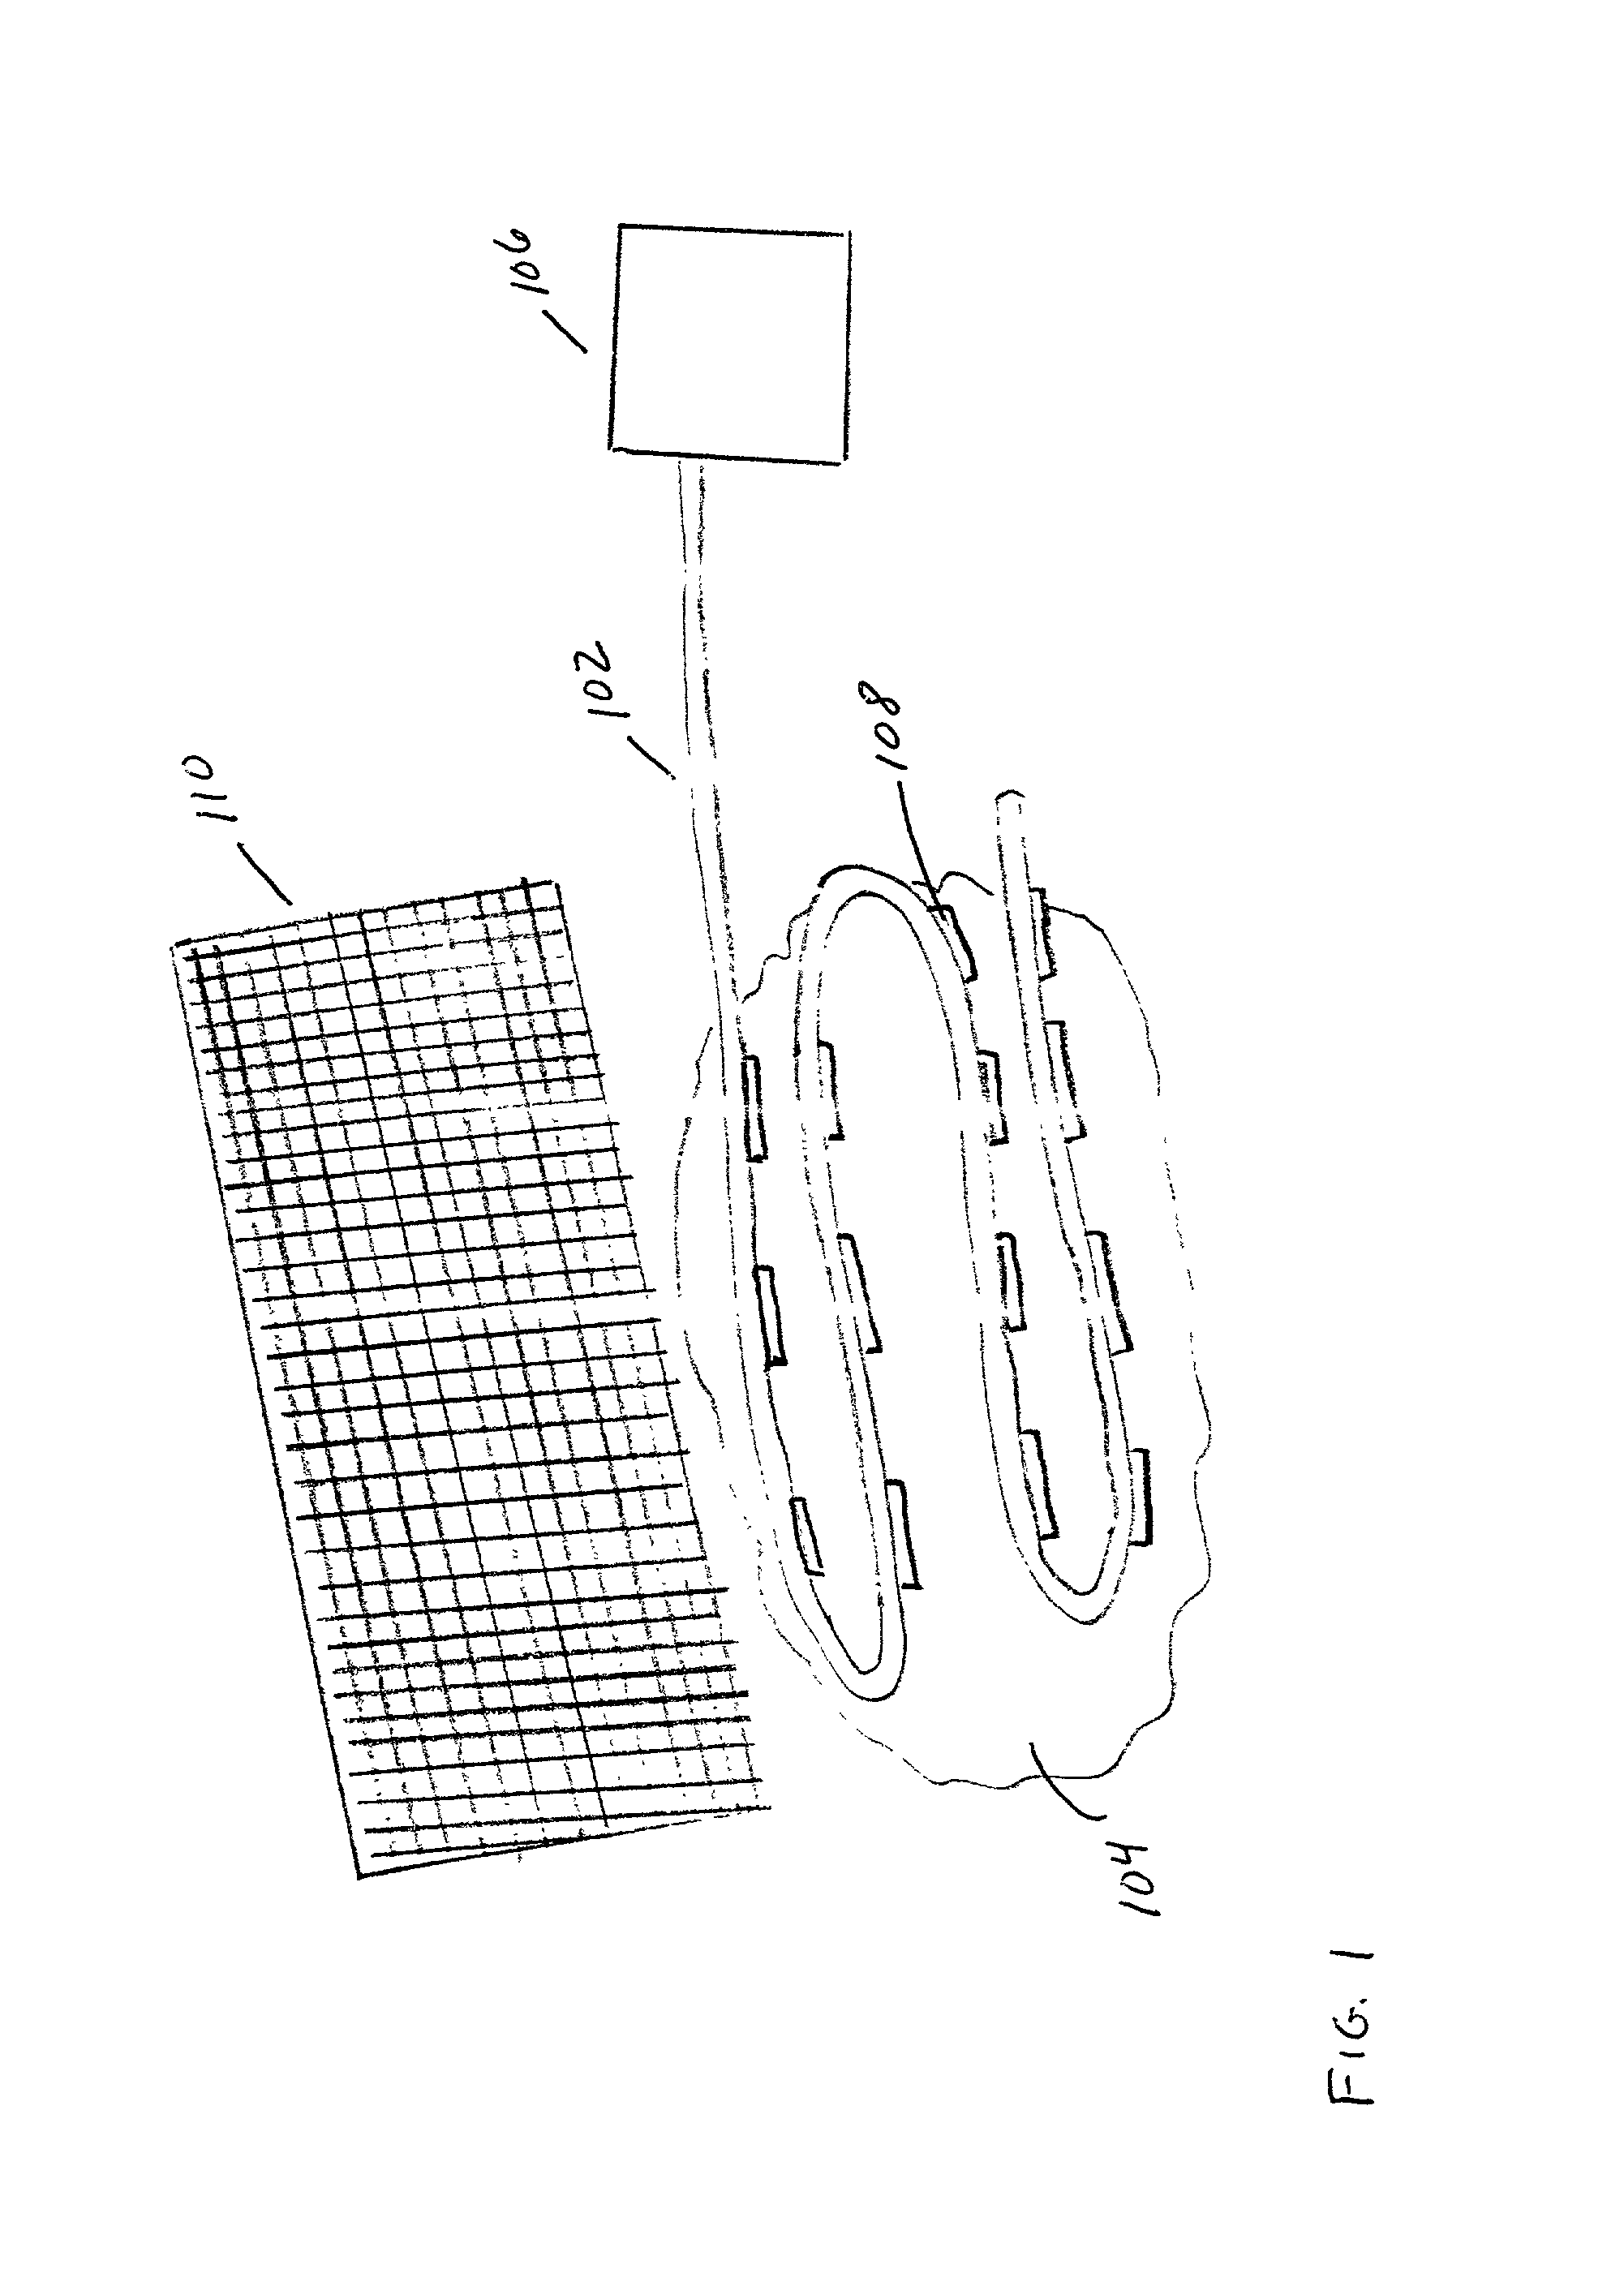 Fiber assisted irradiation system and method for biostimulation